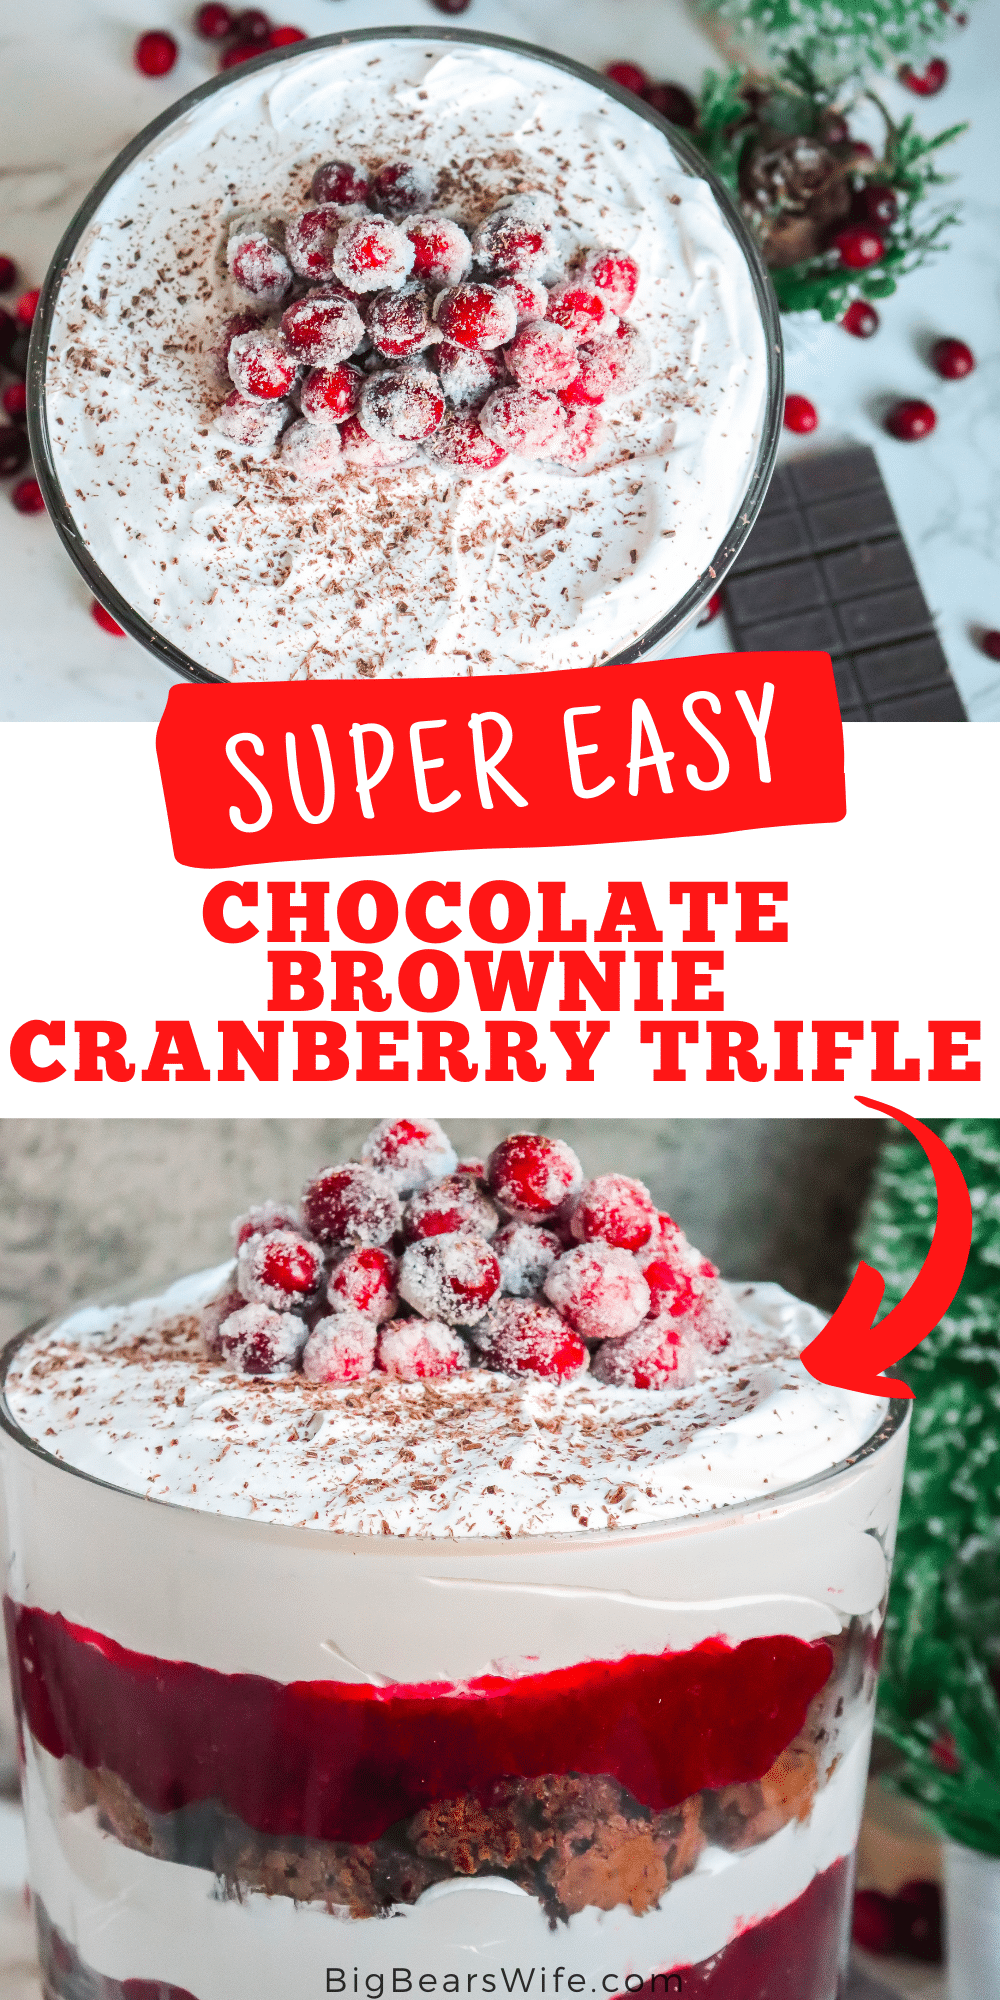 Chocolate Brownie Cranberry Trifle - A beautiful holiday dessert with layers of homemade brownies, homemade cranberry sauce and whipped topping will be one of your favorite treats this holiday season!  via @bigbearswife